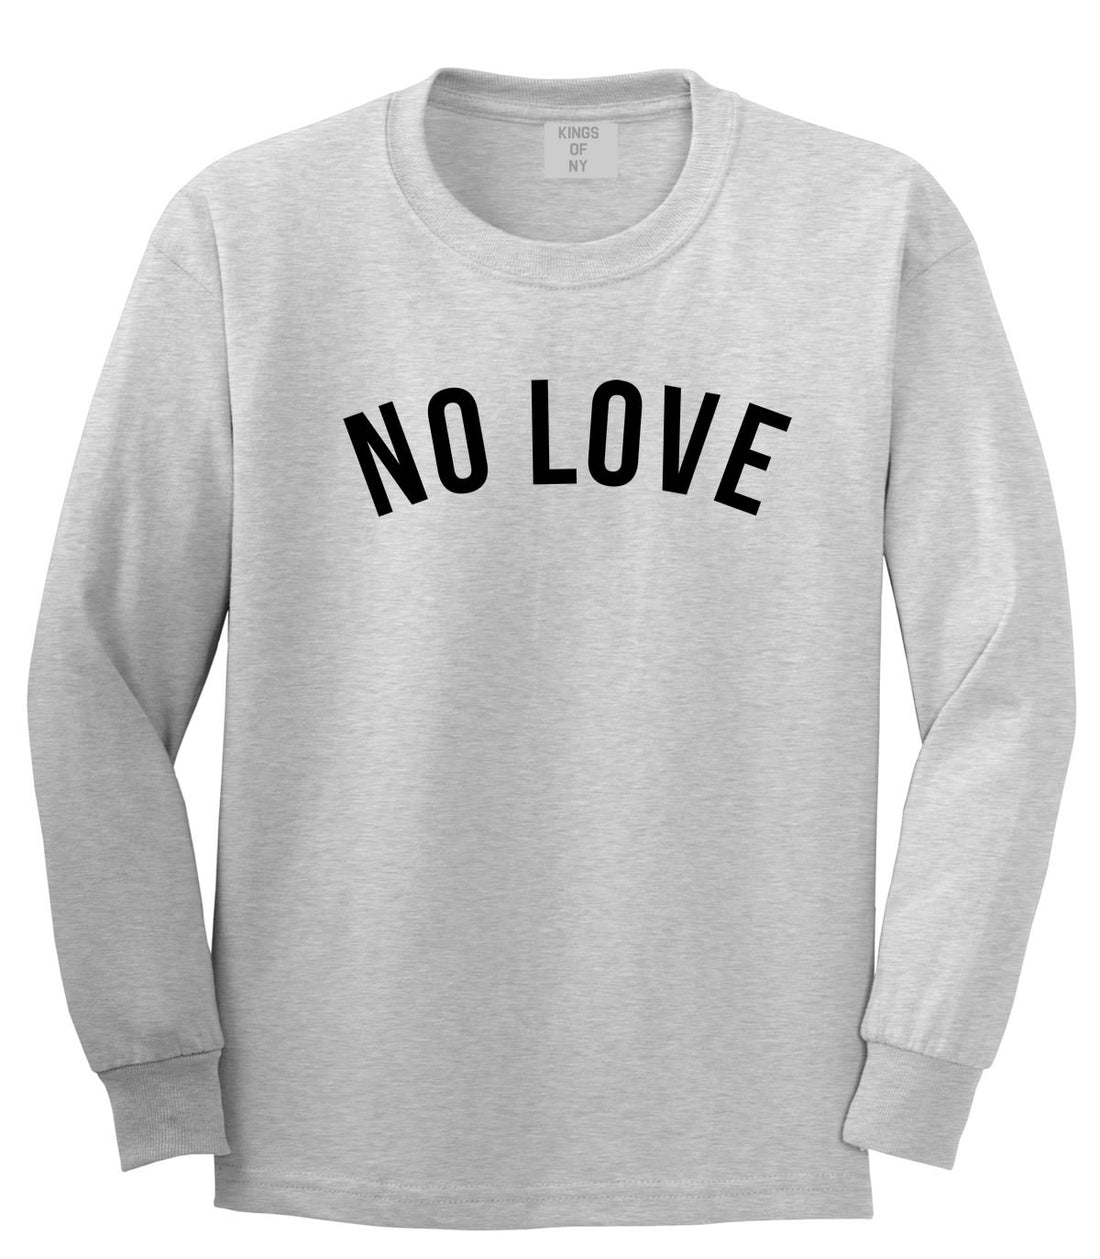 No Love Long Sleeve T-Shirt in Grey by Kings Of NY